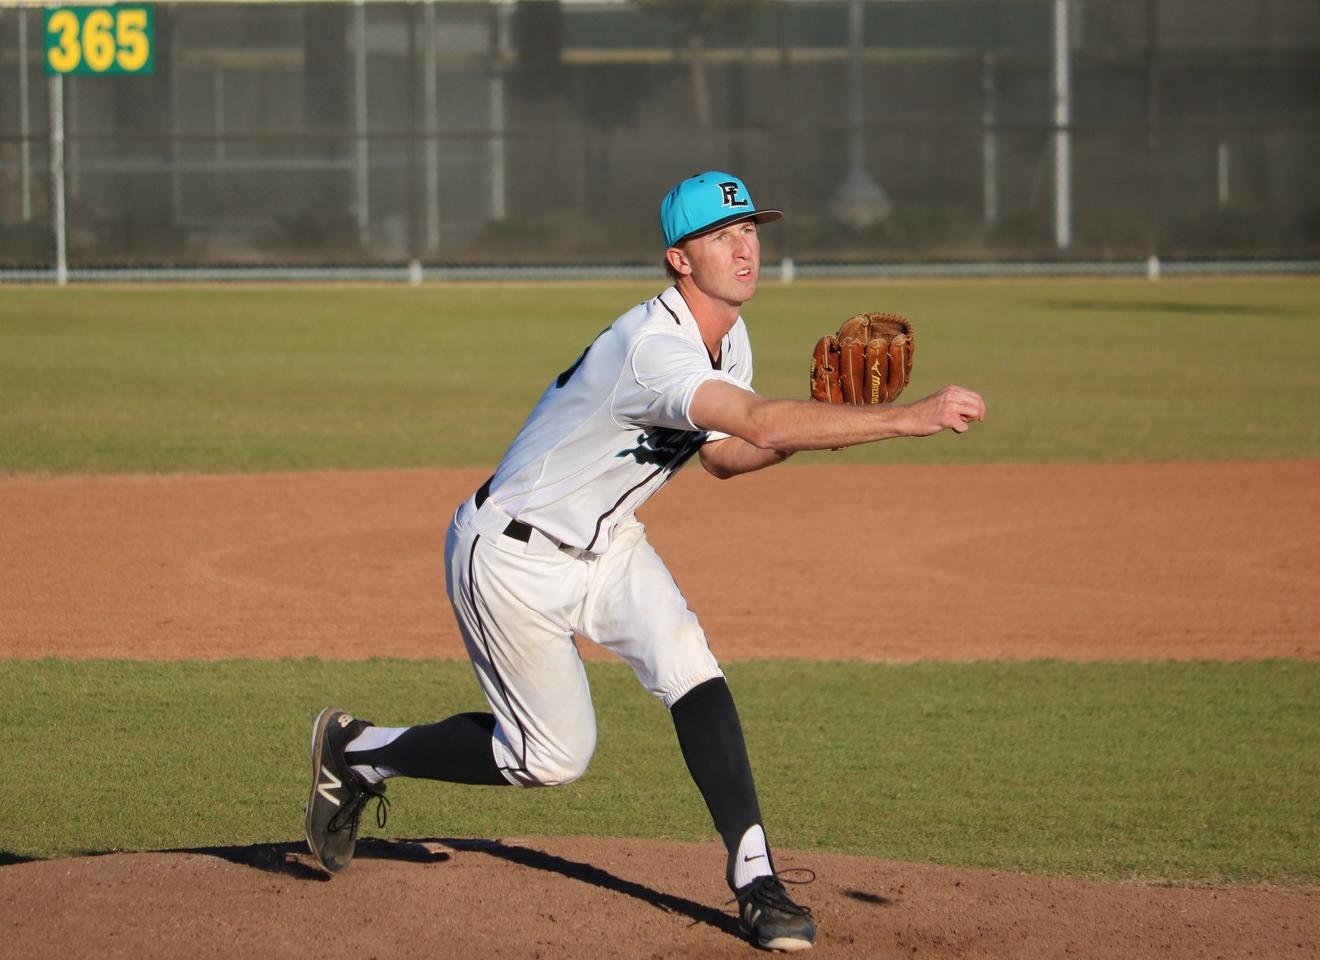 Gustafson’s complete game carries Falcons to victory over Santa Rosa